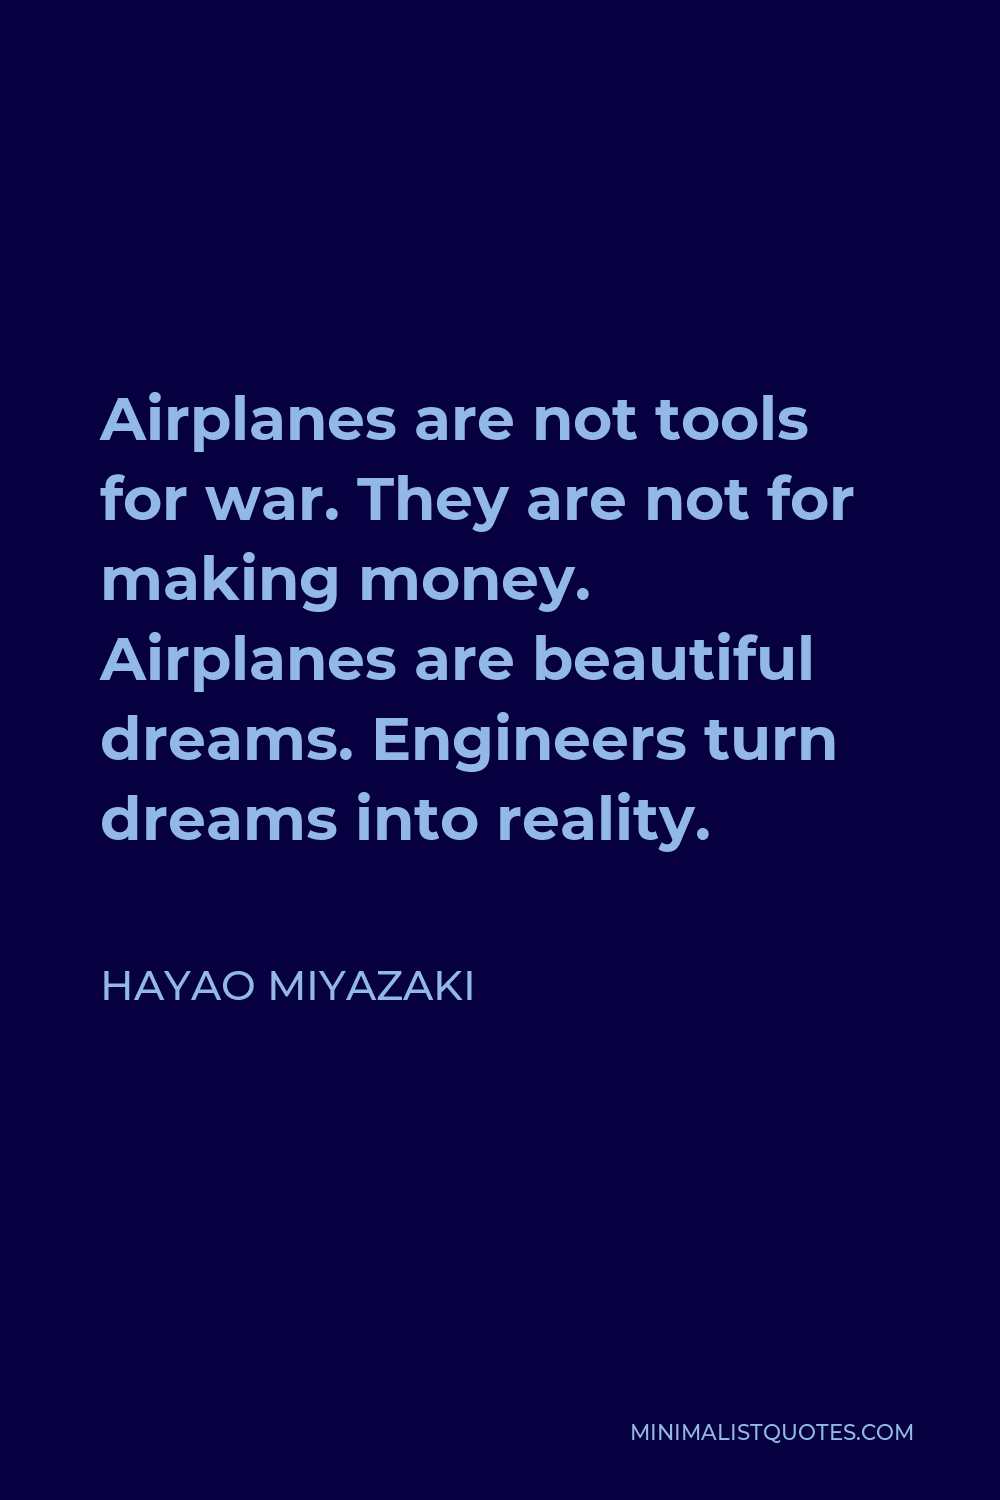 Hayao Miyazaki Quote - Airplanes are not tools for war. They are not for making money. Airplanes are beautiful dreams. Engineers turn dreams into reality.